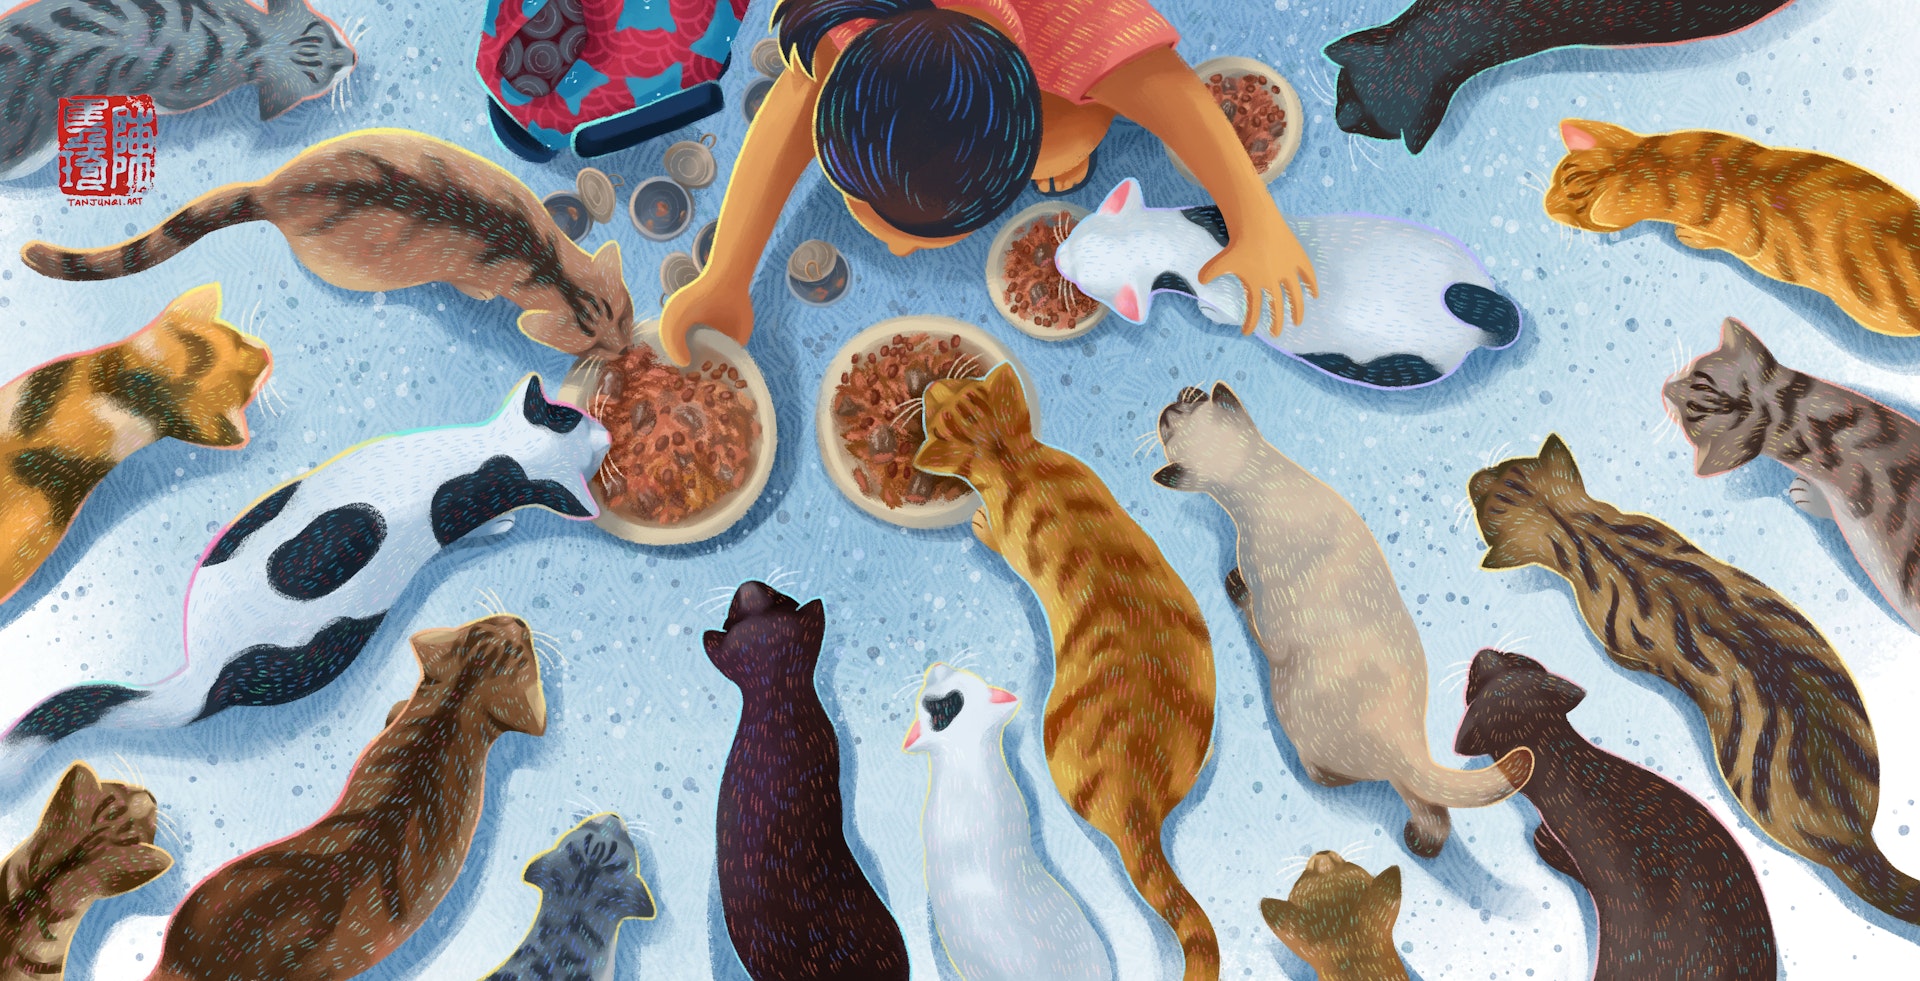 Illustration of a woman putting out plates of cat food and cats crowding around her